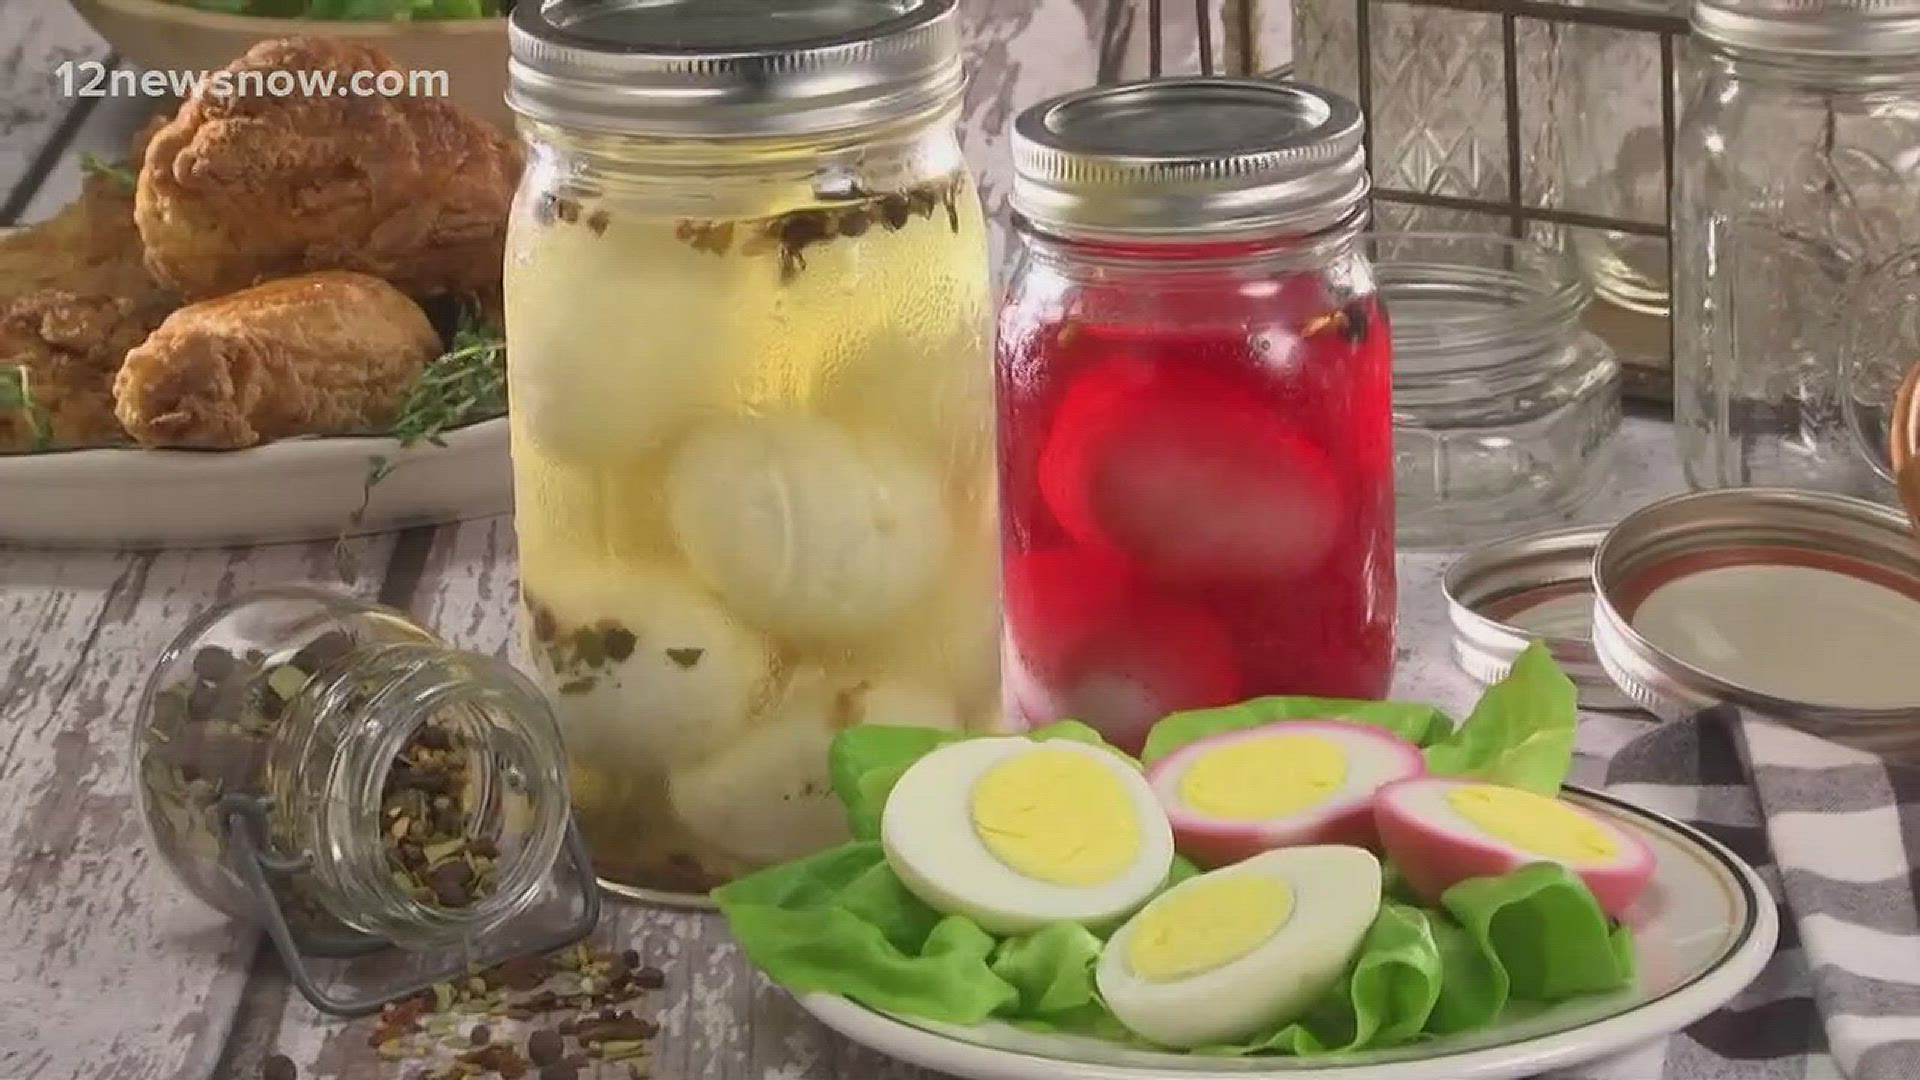 Mr. Food makes Tangy Pickled Eggs